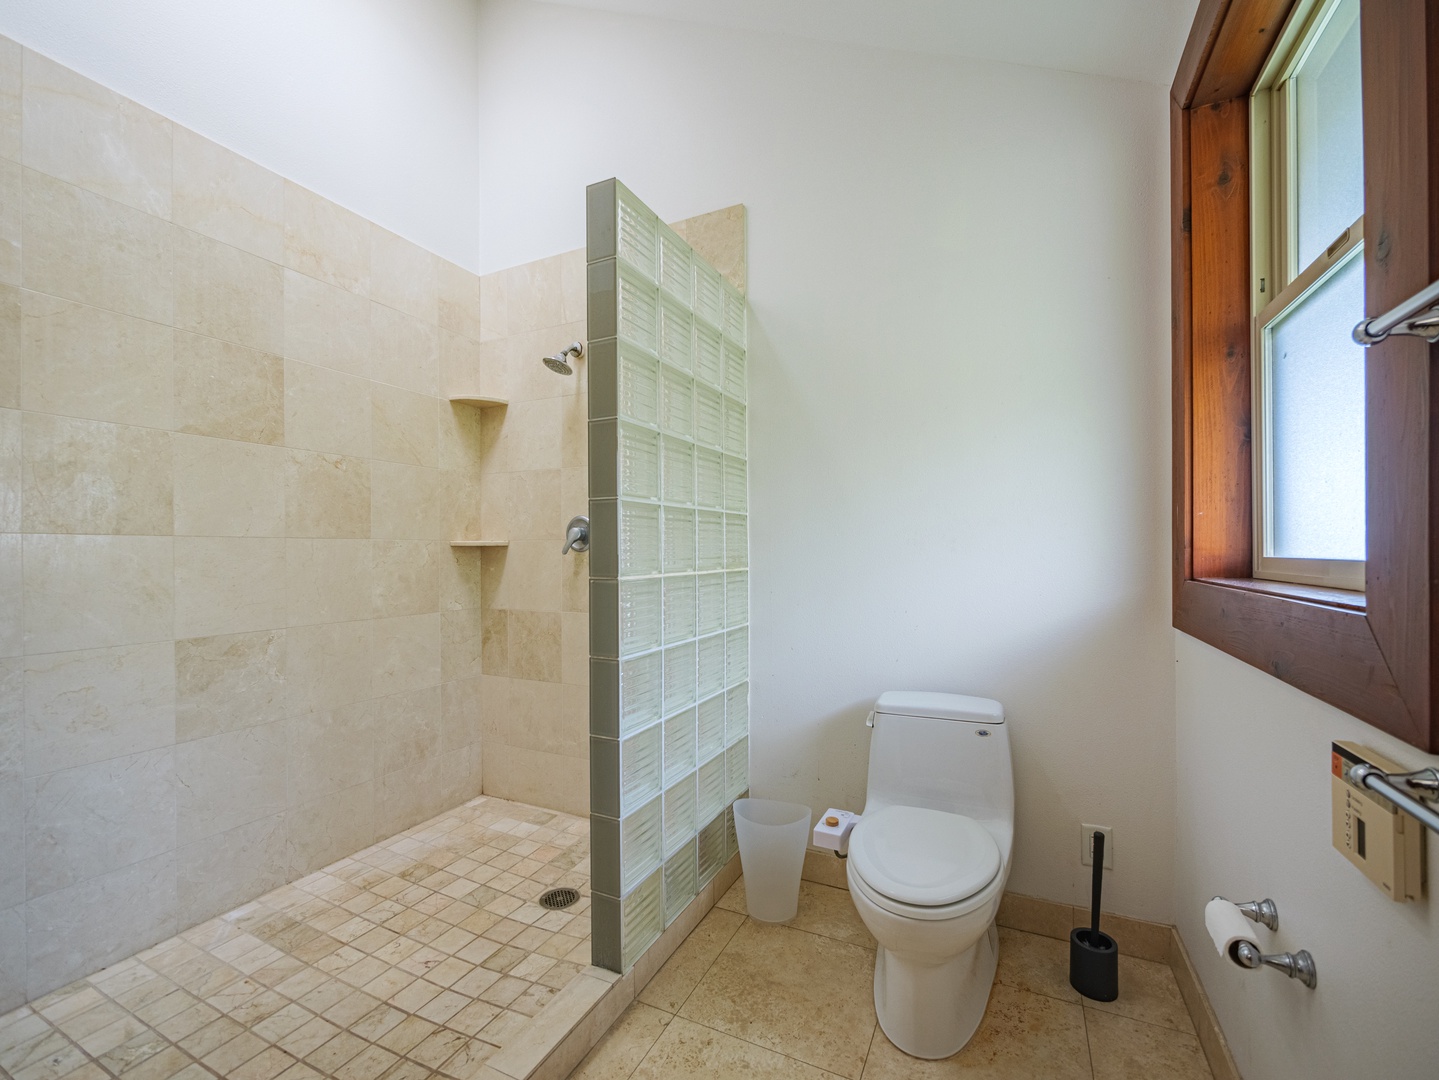 Waianae Vacation Rentals, Konishiki Beachhouse - Ensuite with a walk-in shower.